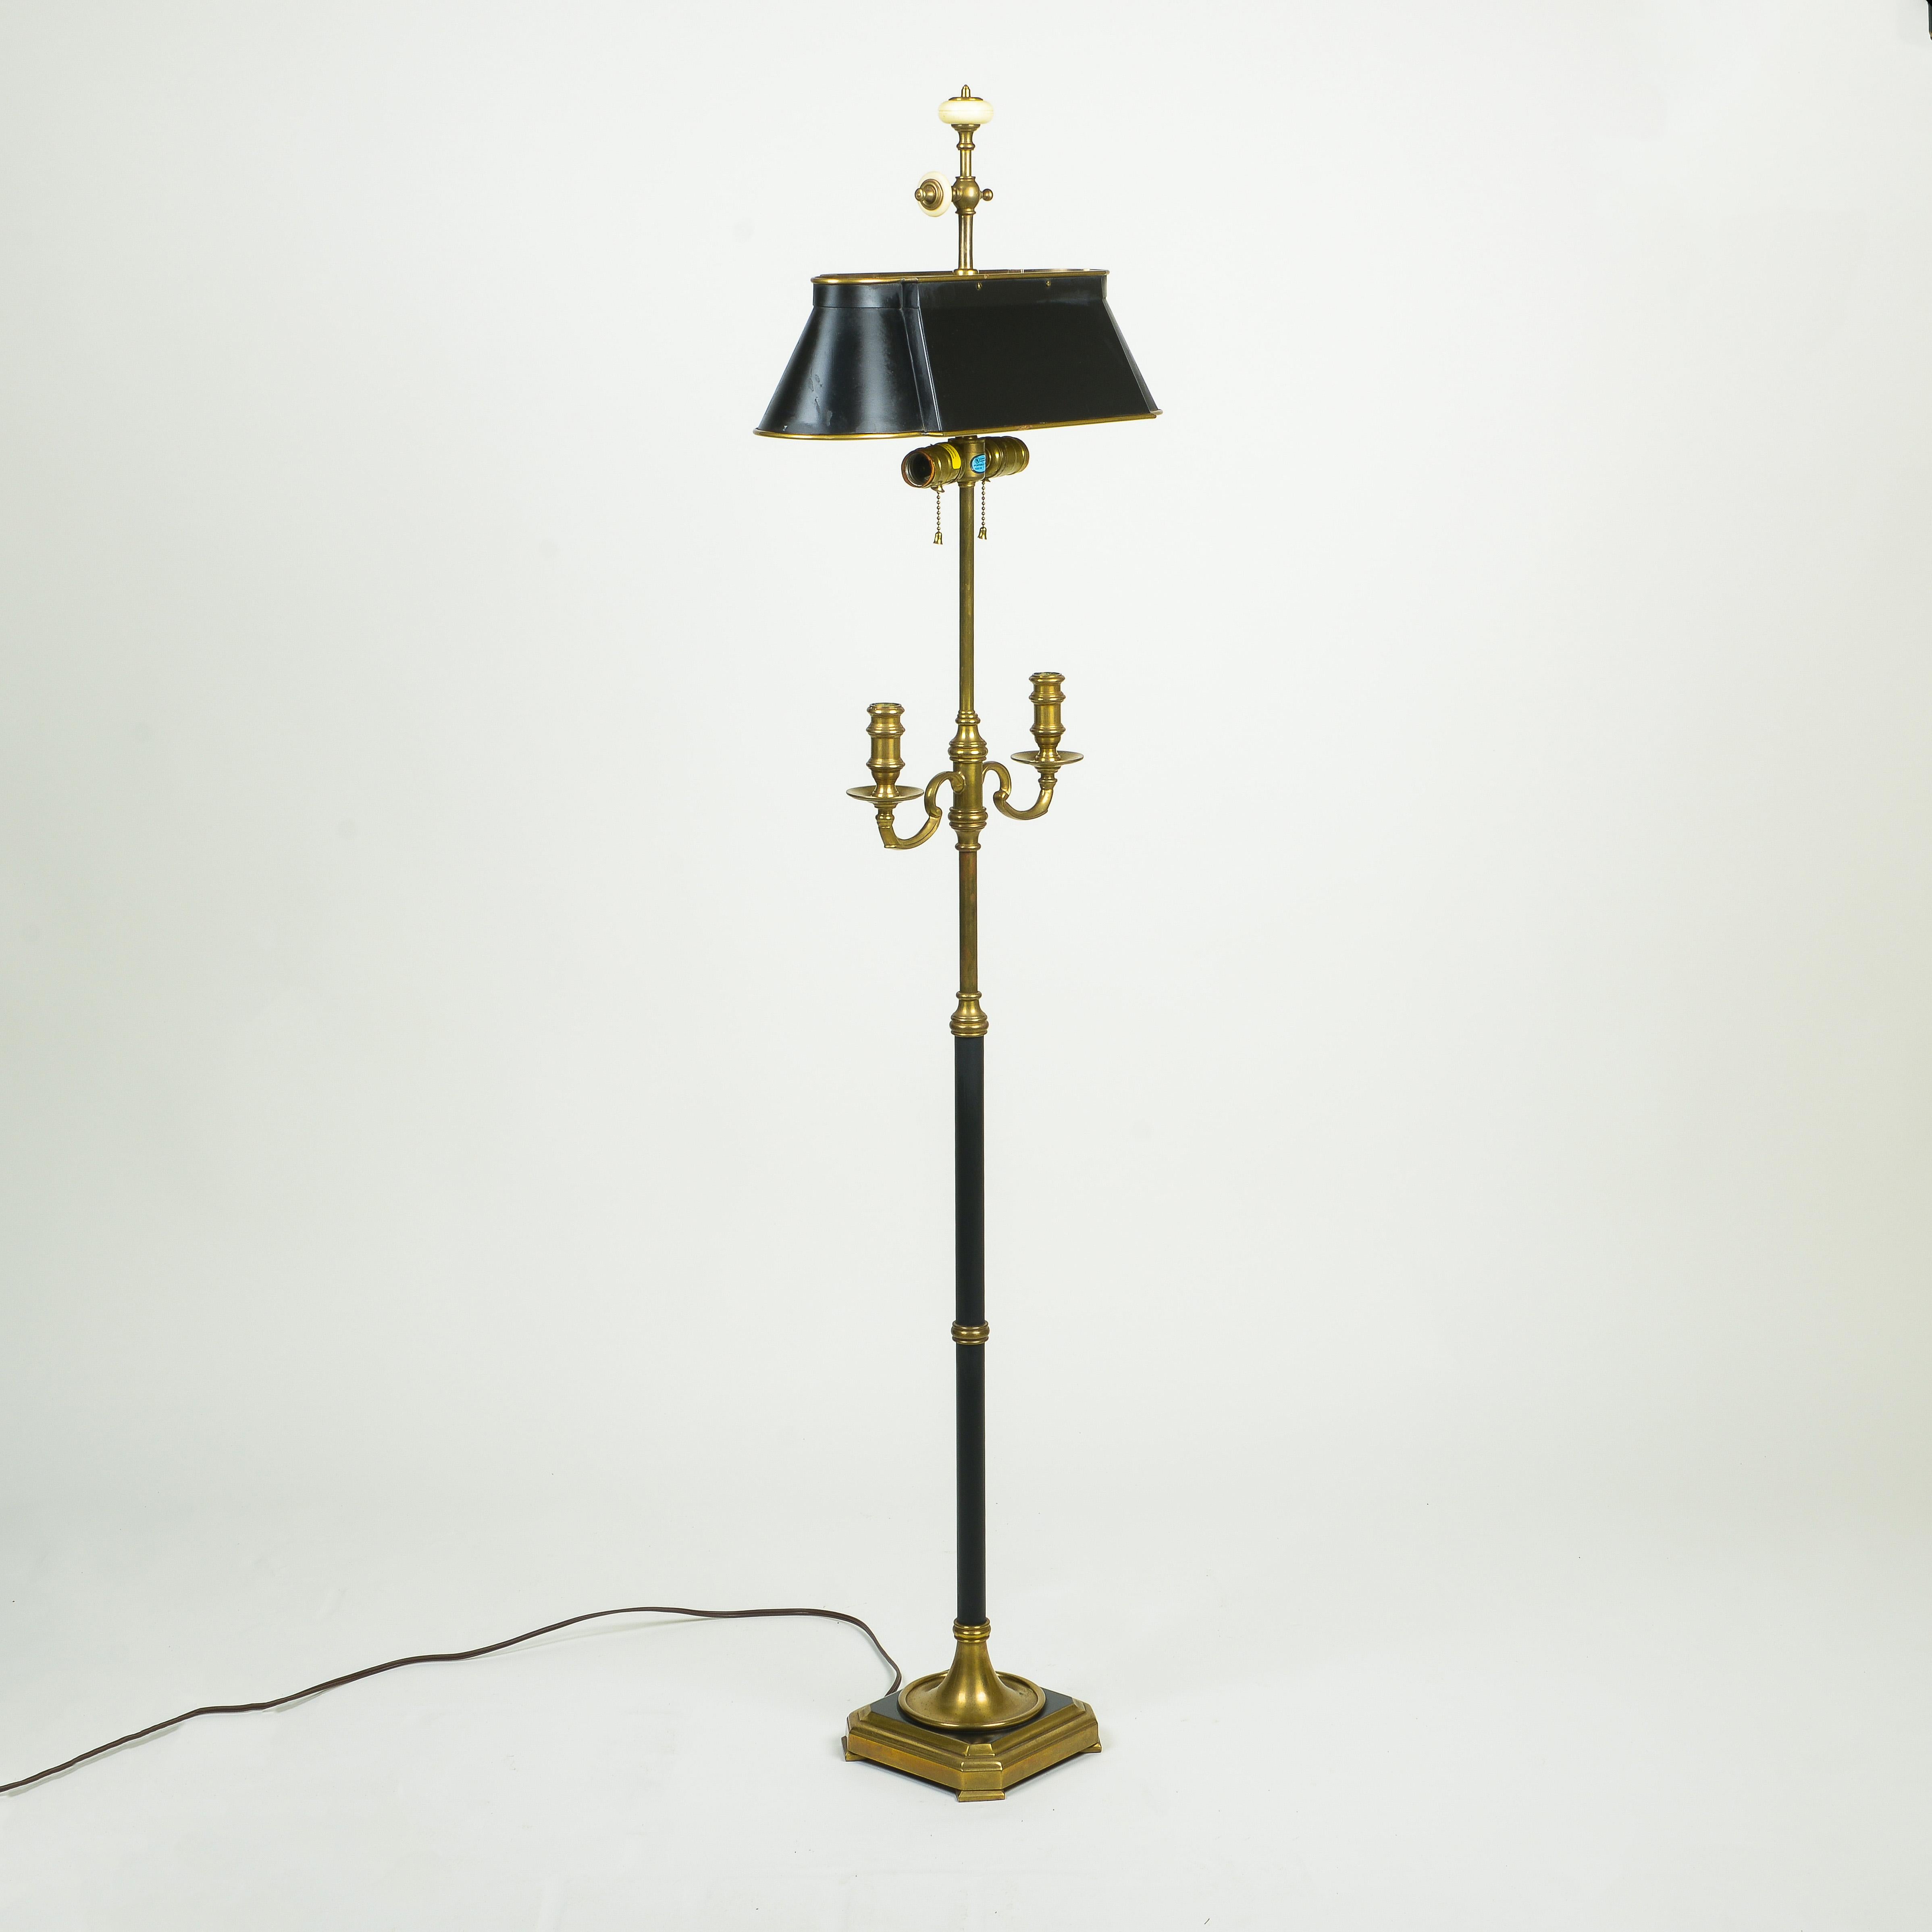 The oval bouillotte shade set above two bulb sockets; the columnar brass and black enamel stand issuing two outward scrolling candlearms; on a square stepped base.